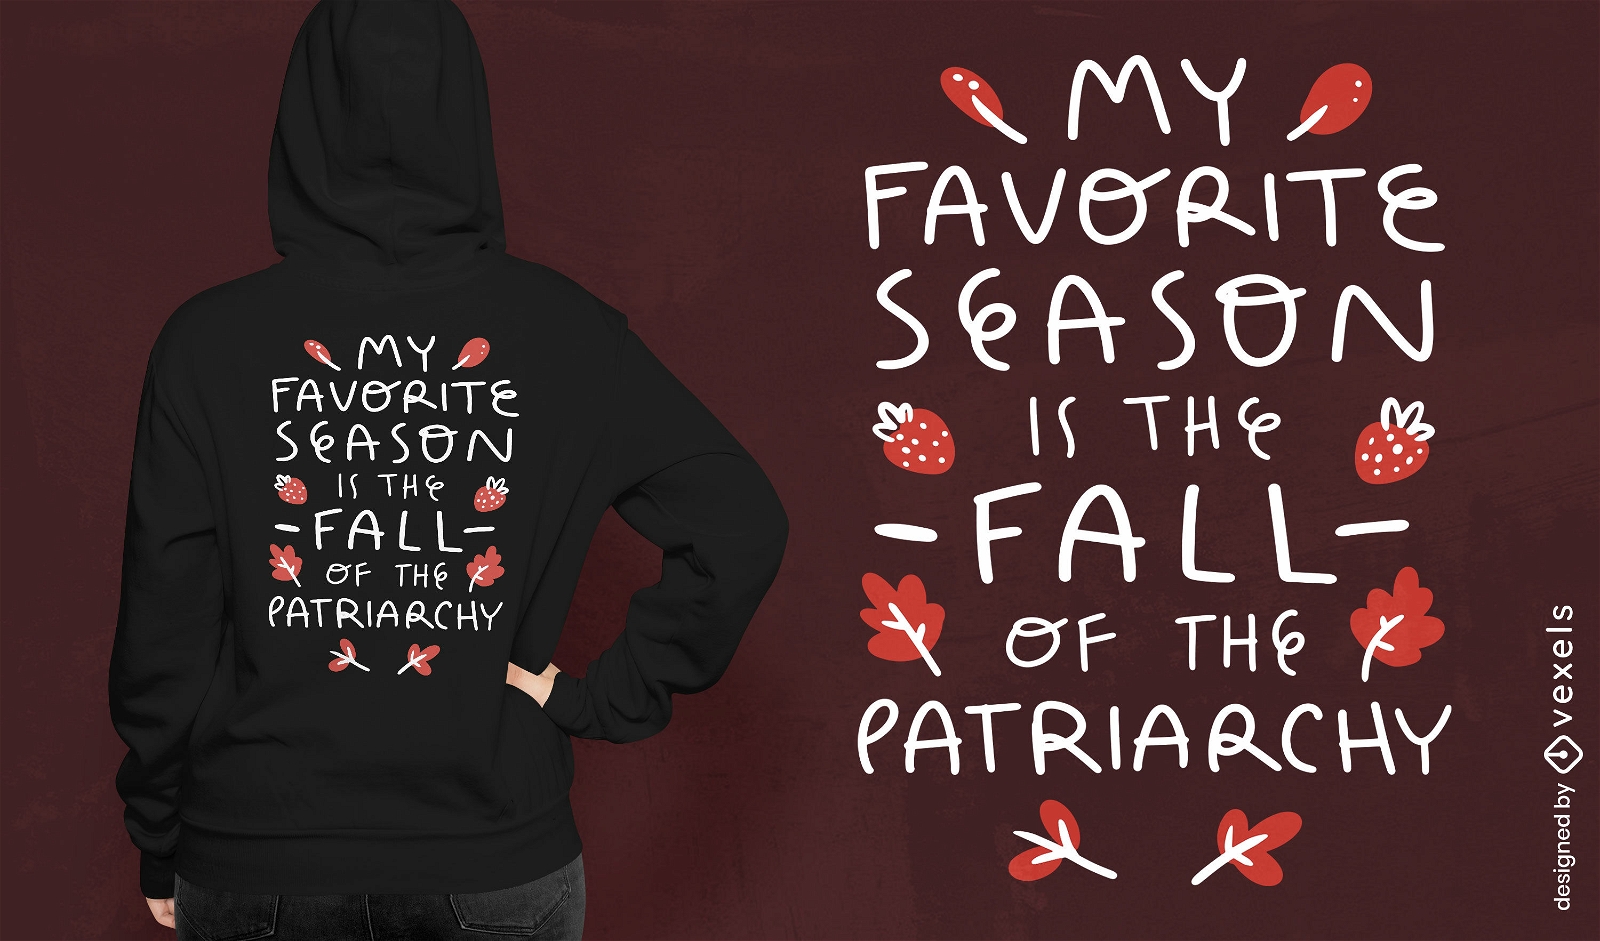 Fall of the patriarchy feminist t-shirt design